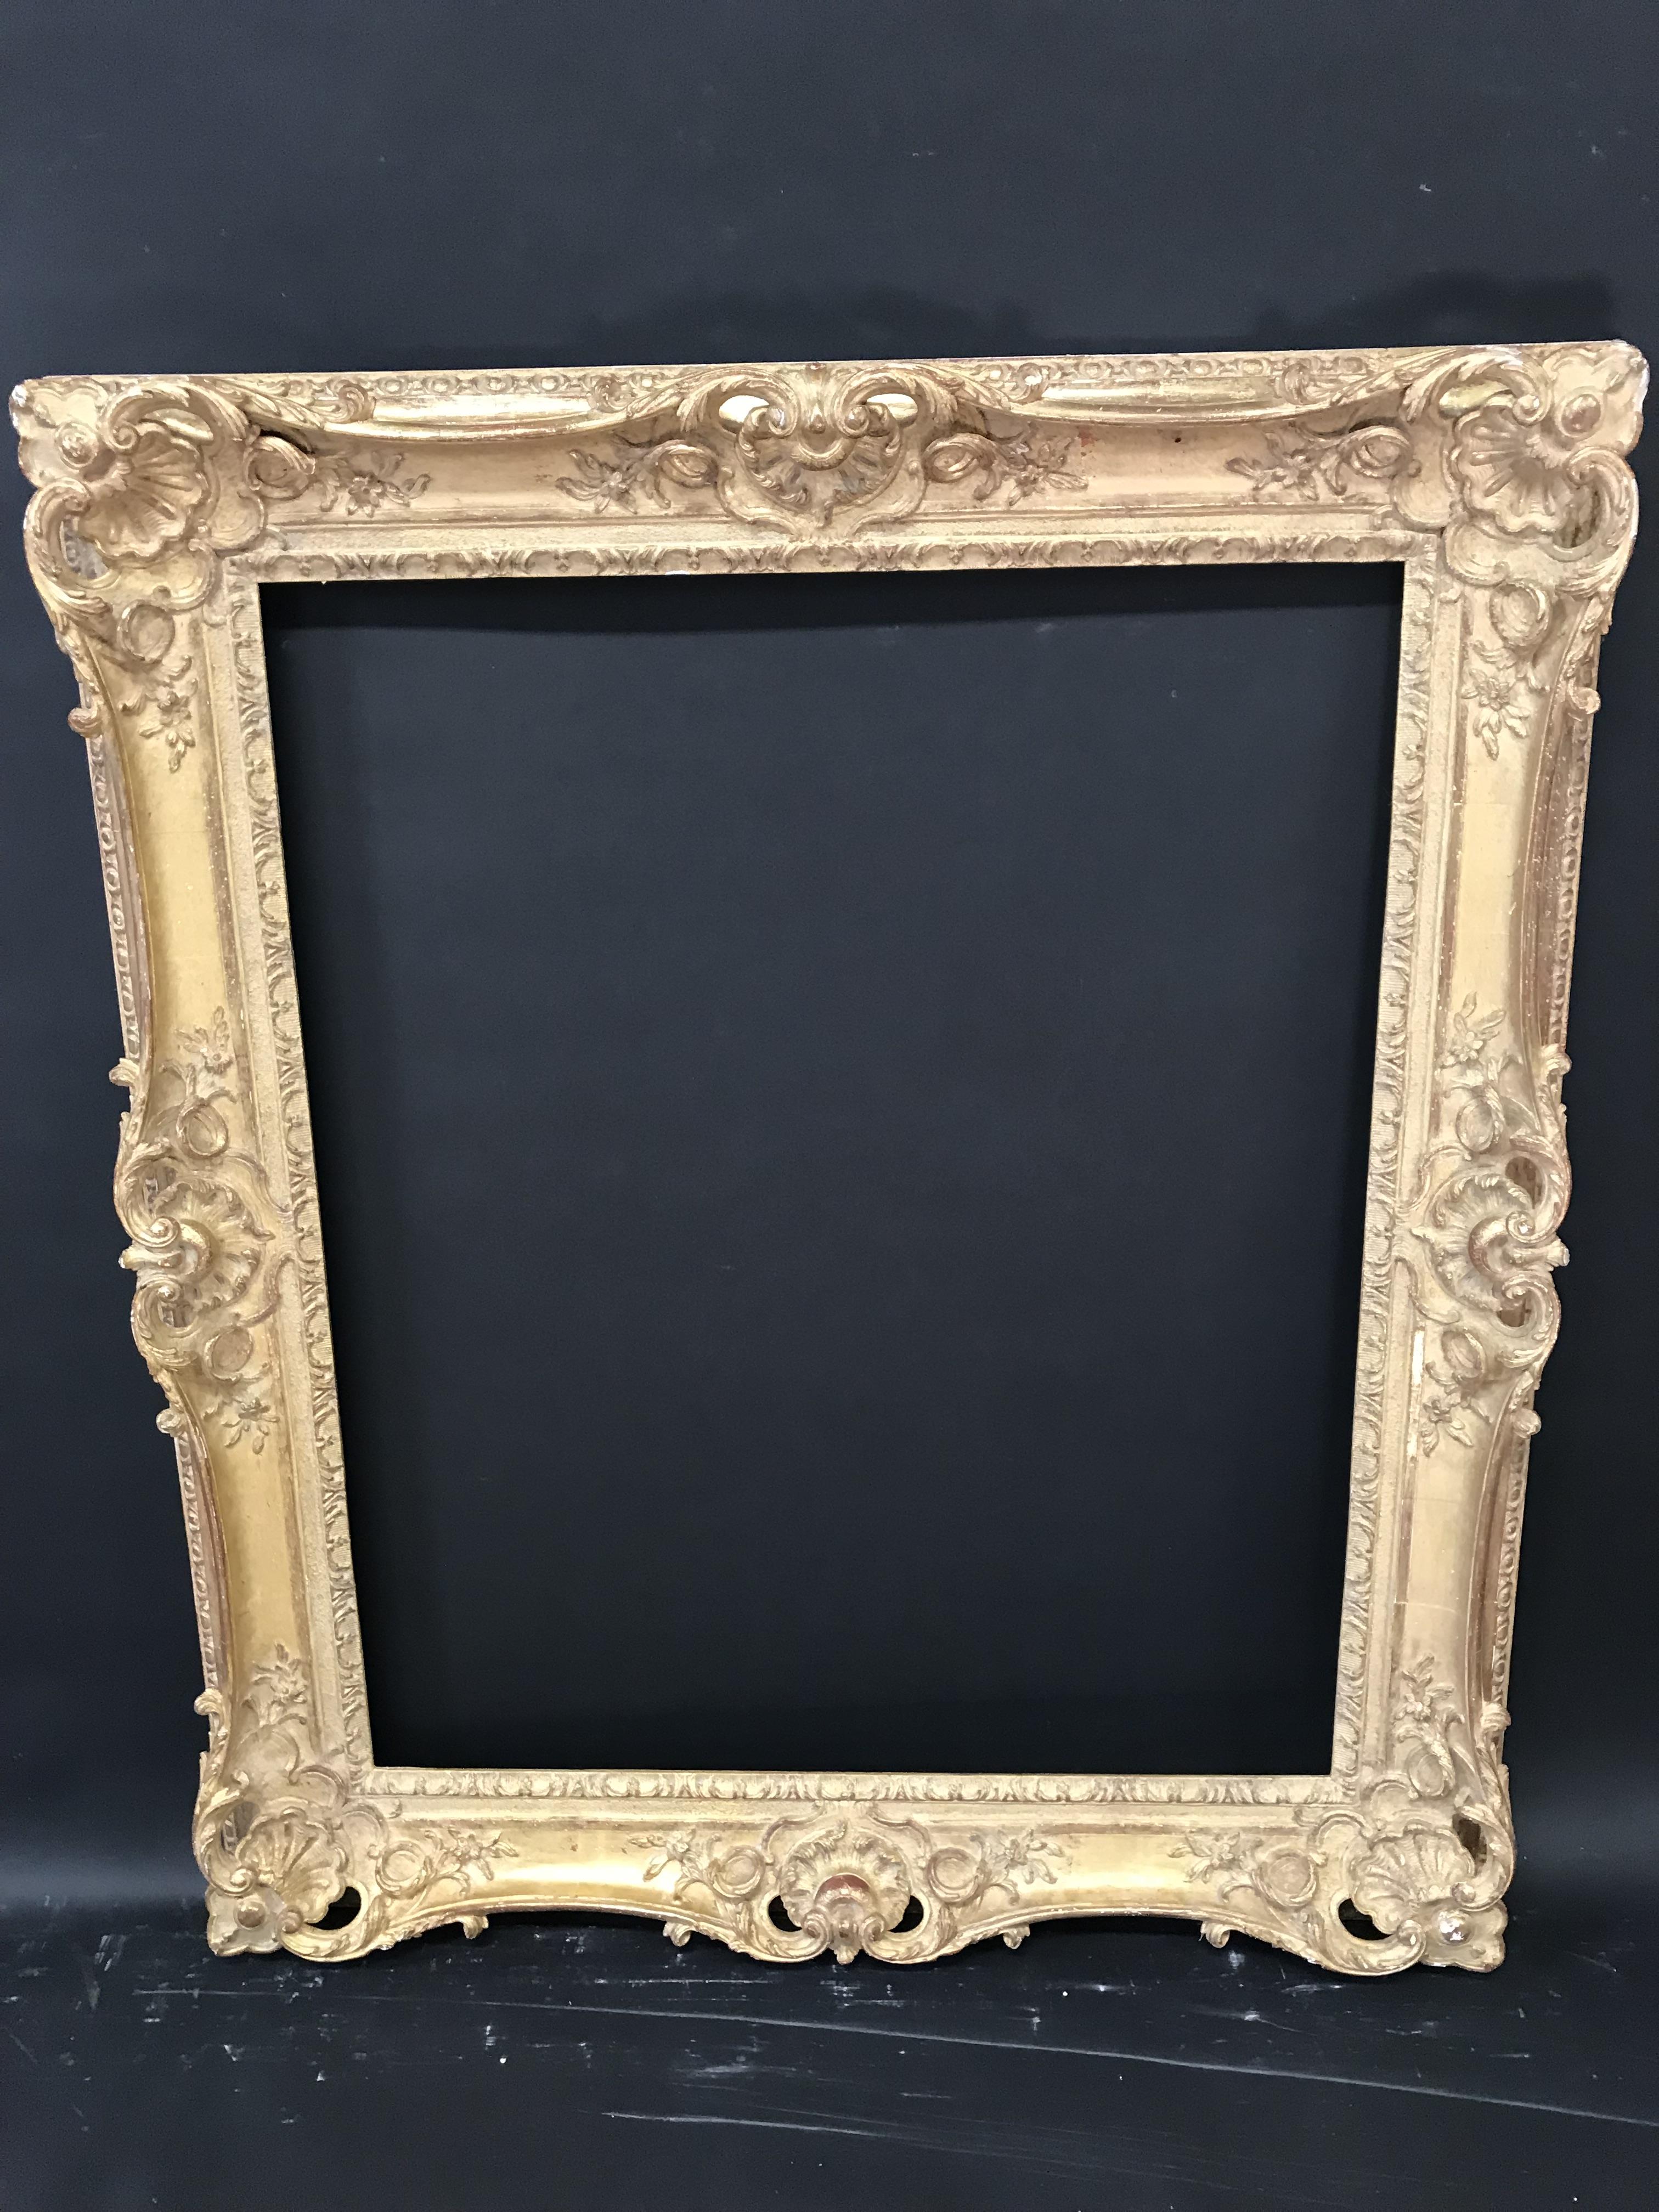 19th Century English School. A French Style Gilt Composition Frame, with Swept and Pierced Centres - Image 2 of 3